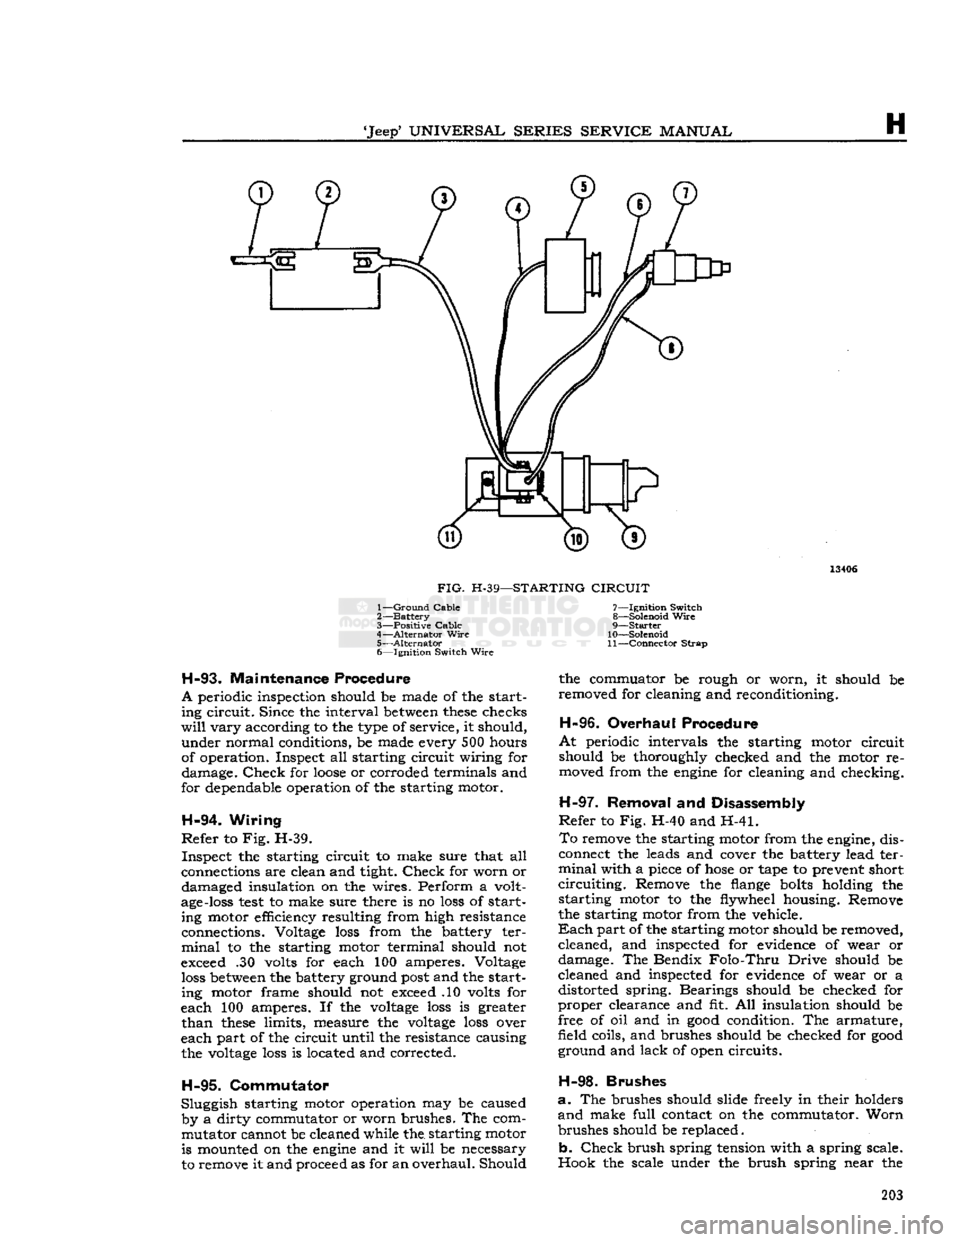 JEEP CJ 1953 Owners Manual 
Jeep*
 UNIVERSAL
 SERIES SERVICE
 MANUAL 

H 
 13406 

FIG.
 H-39—STARTING
 CIRCUIT 

1—
 Ground
 Cable 
2—
 Battery 

3—
 Positive Cable 
4—
 Alternator
 Wire 
 5—
 Alternator 

6— Ig